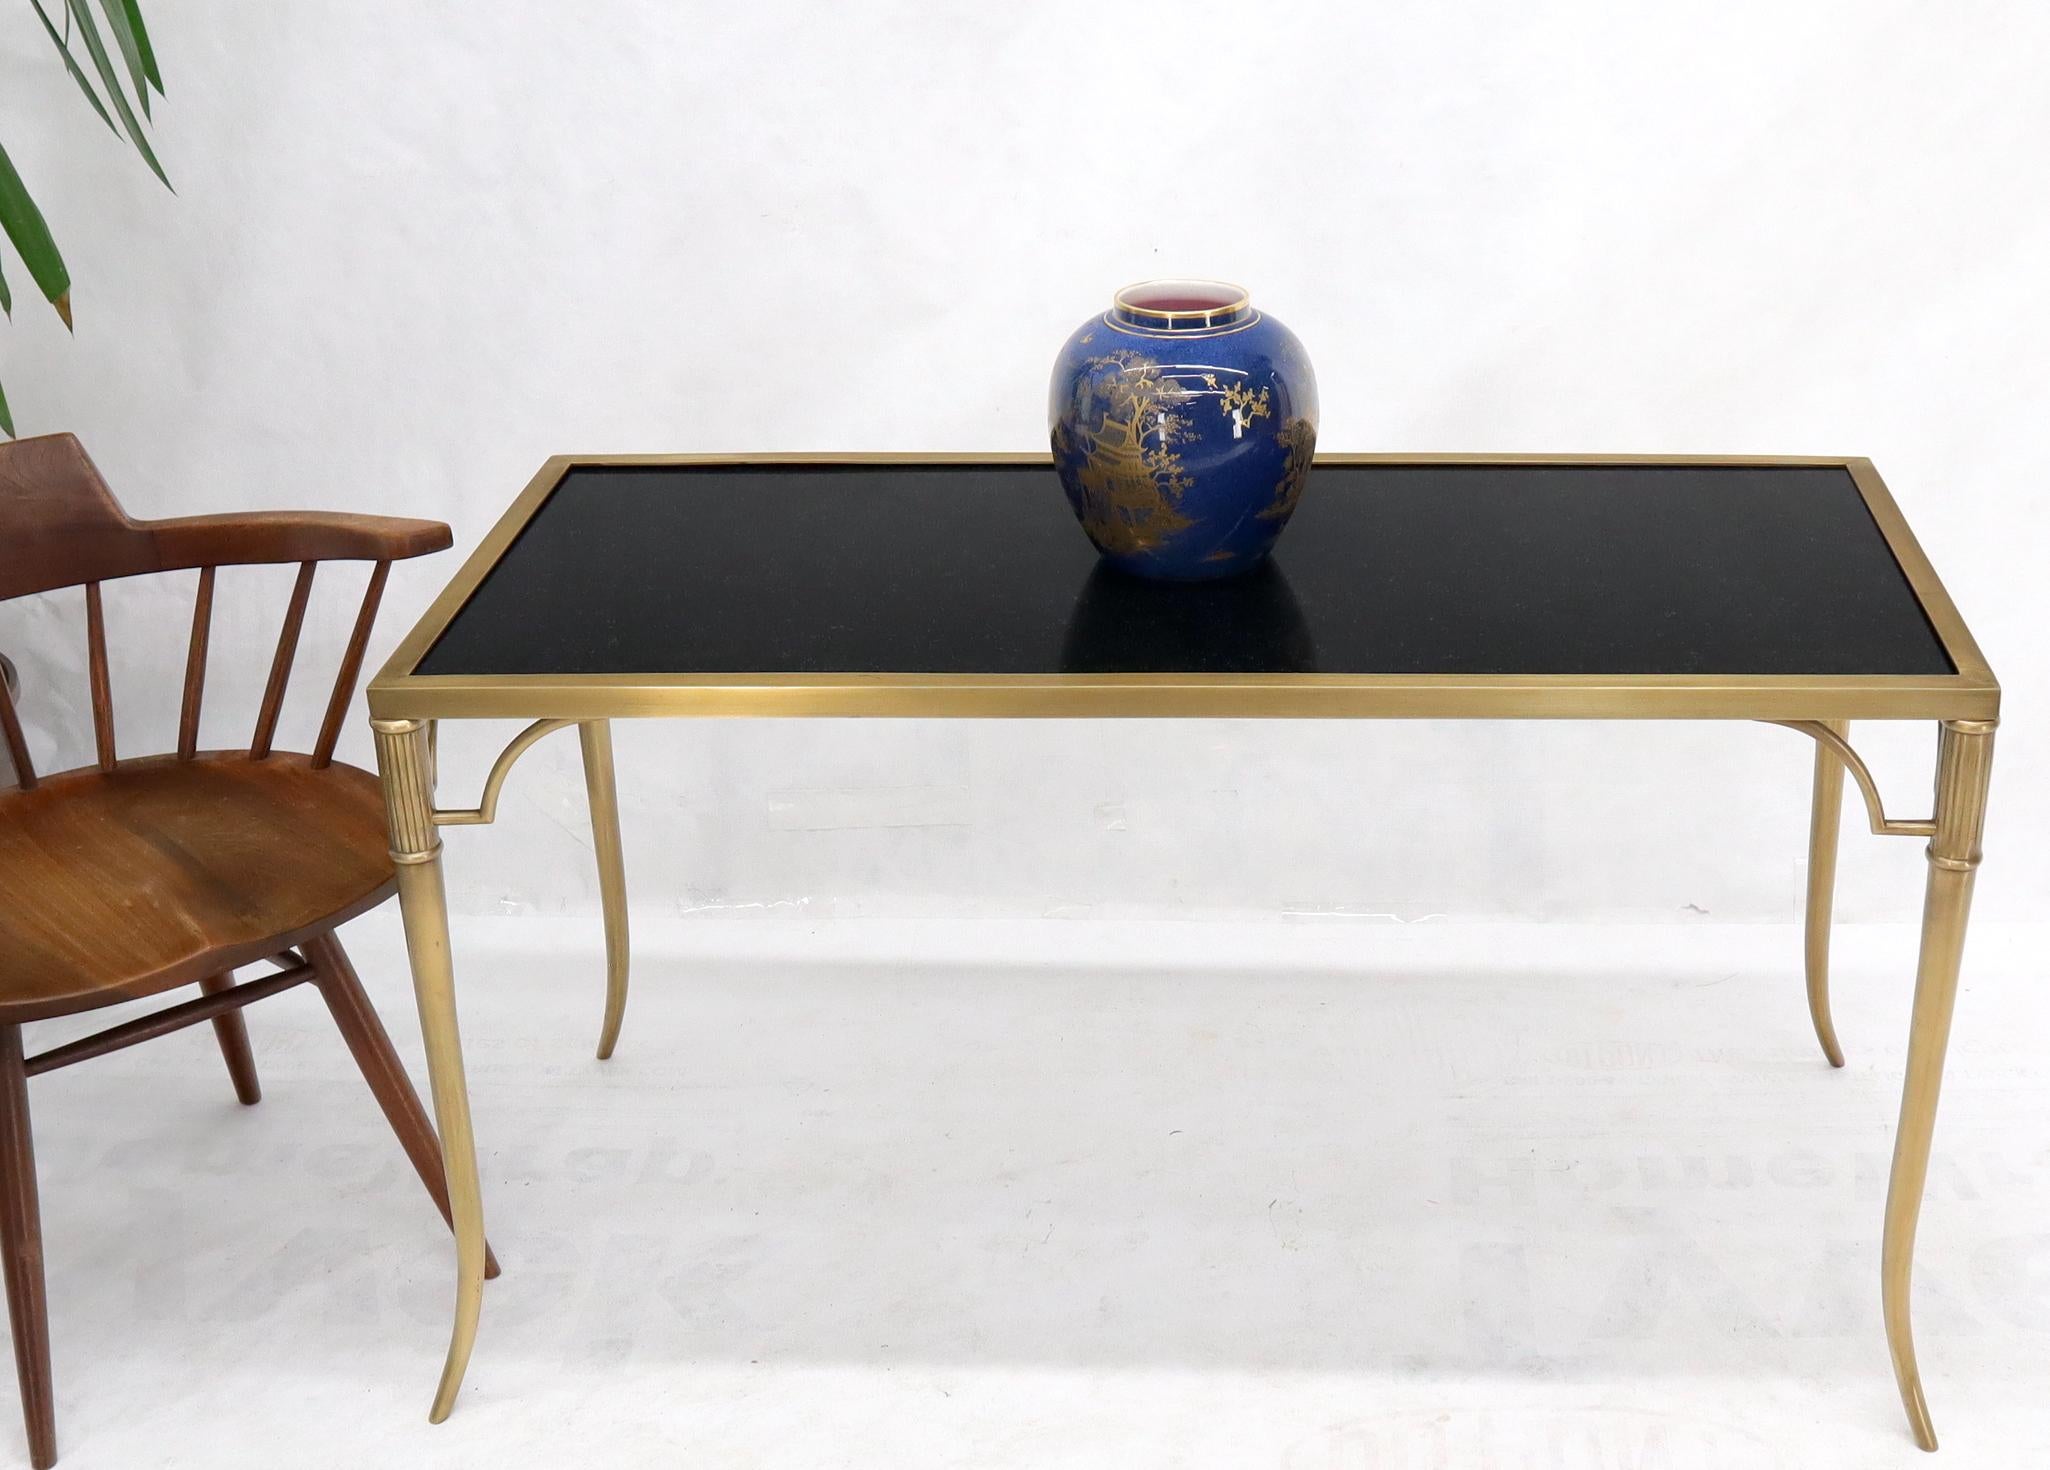 Heavy grade materials coffee table made of solid black granite top and solid brass frame with tapered legs.